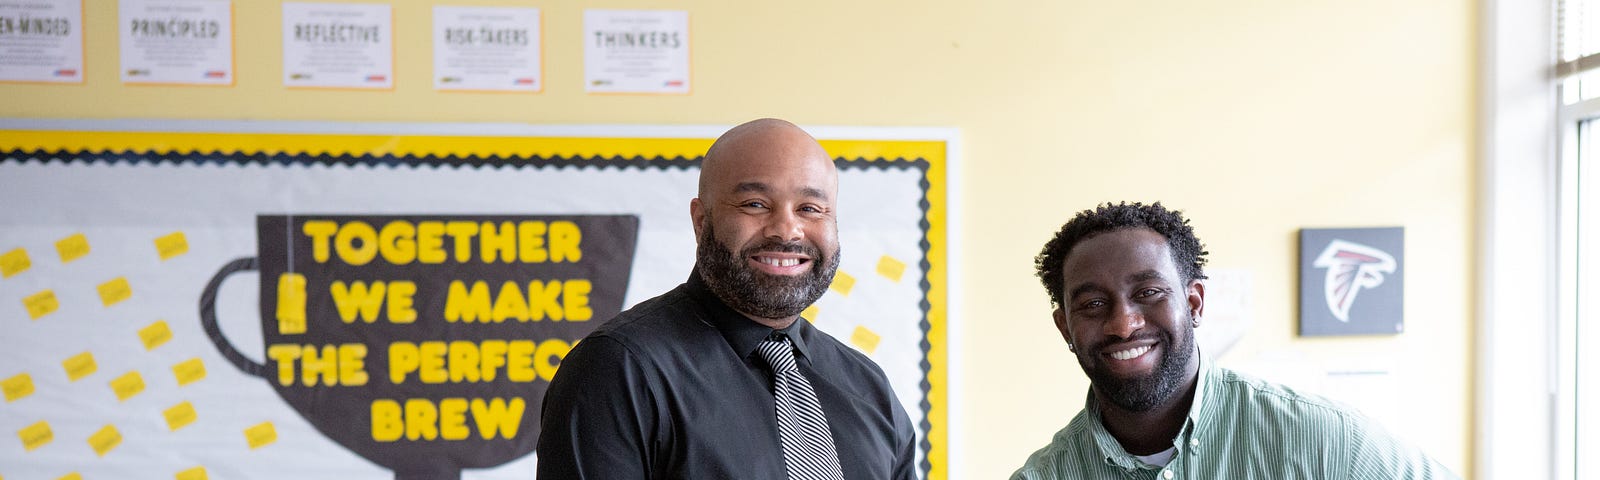 Two male teachers of color smile at the camera.